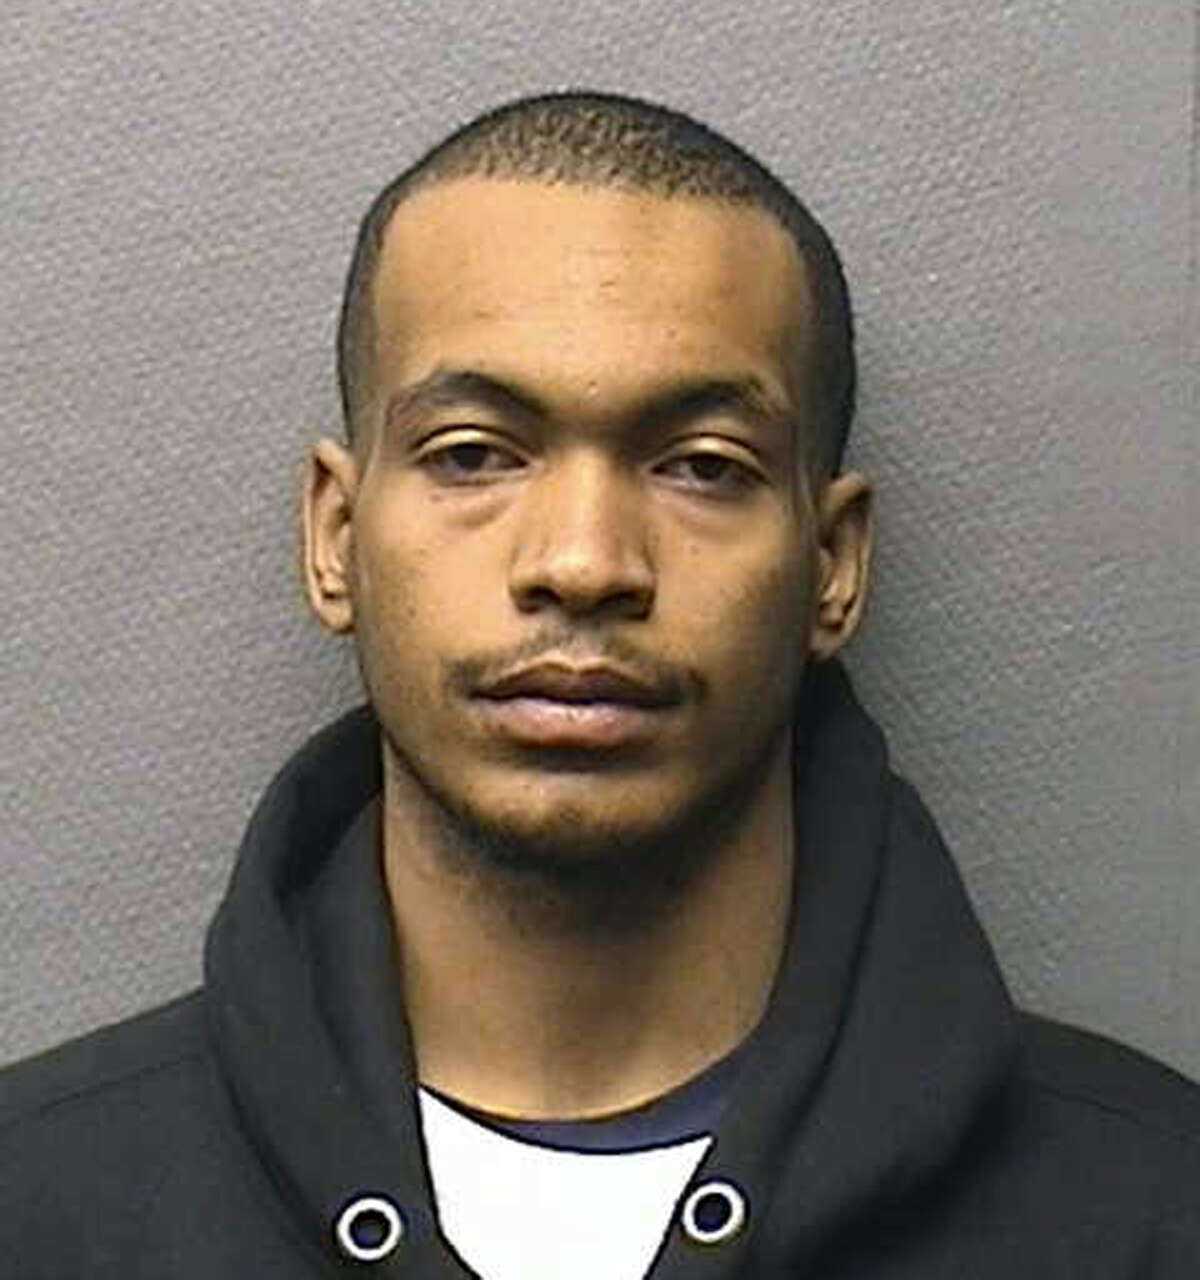 This photo provided by the Harris County Sheriff's Office shows Nur J. Mohamed. A high school student, Danish Moazzam Minhas, told investigators he hired Mohamed to kill his mother because she was too strict, police said in announcing capital murder charges against the two, Wednesday, Jan. 6, 2010. (AP Photo/Harris County Sheriff's Office)